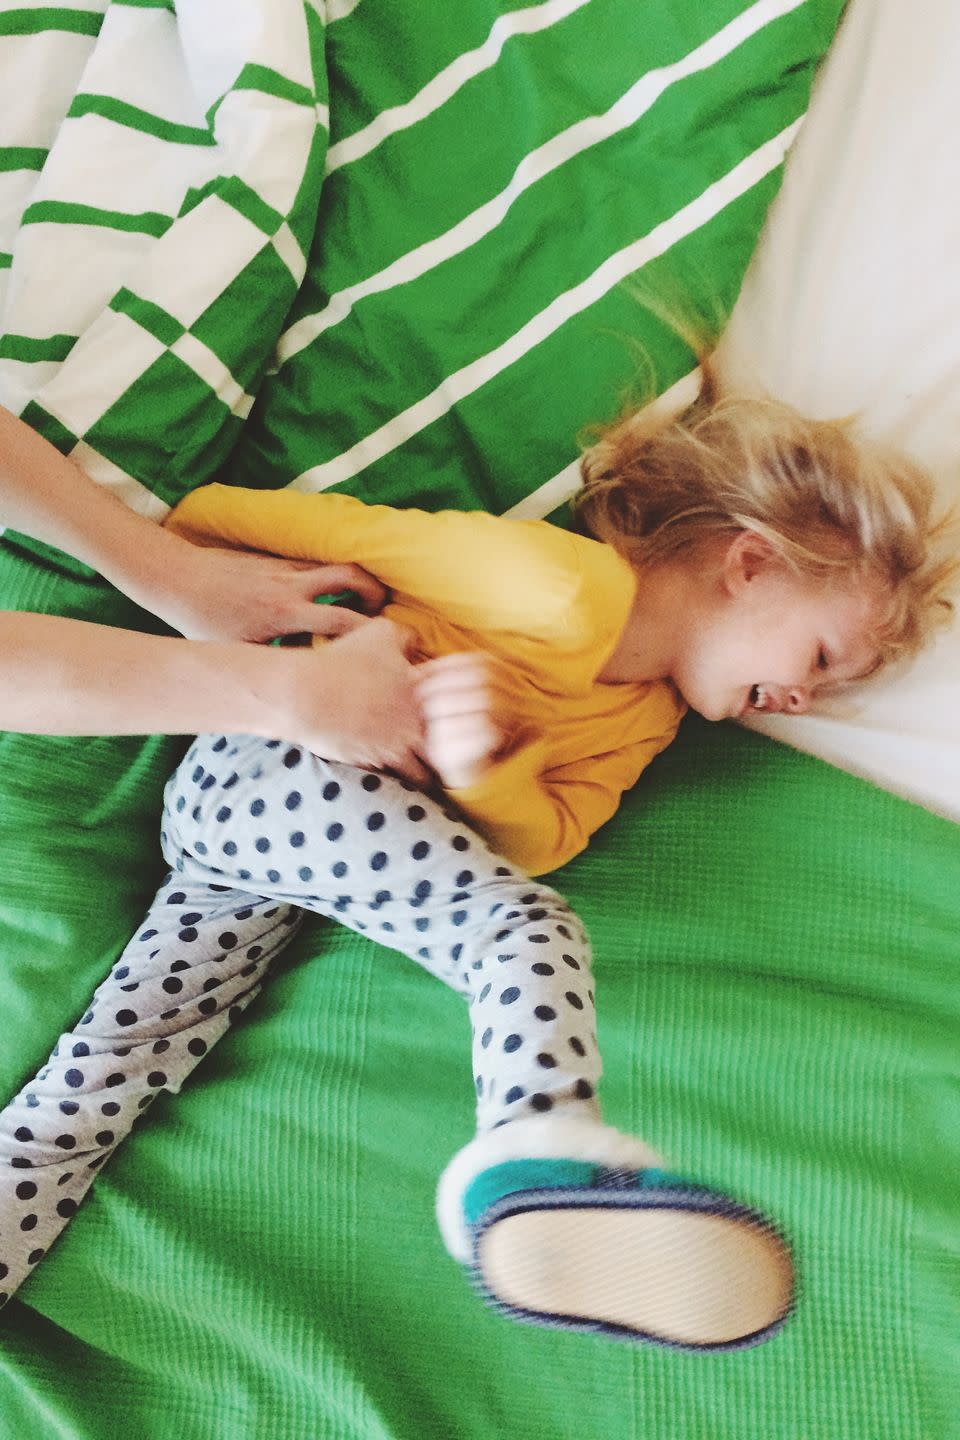 WITH YOUR DAUGHTER: Start an all-out tickle fight.